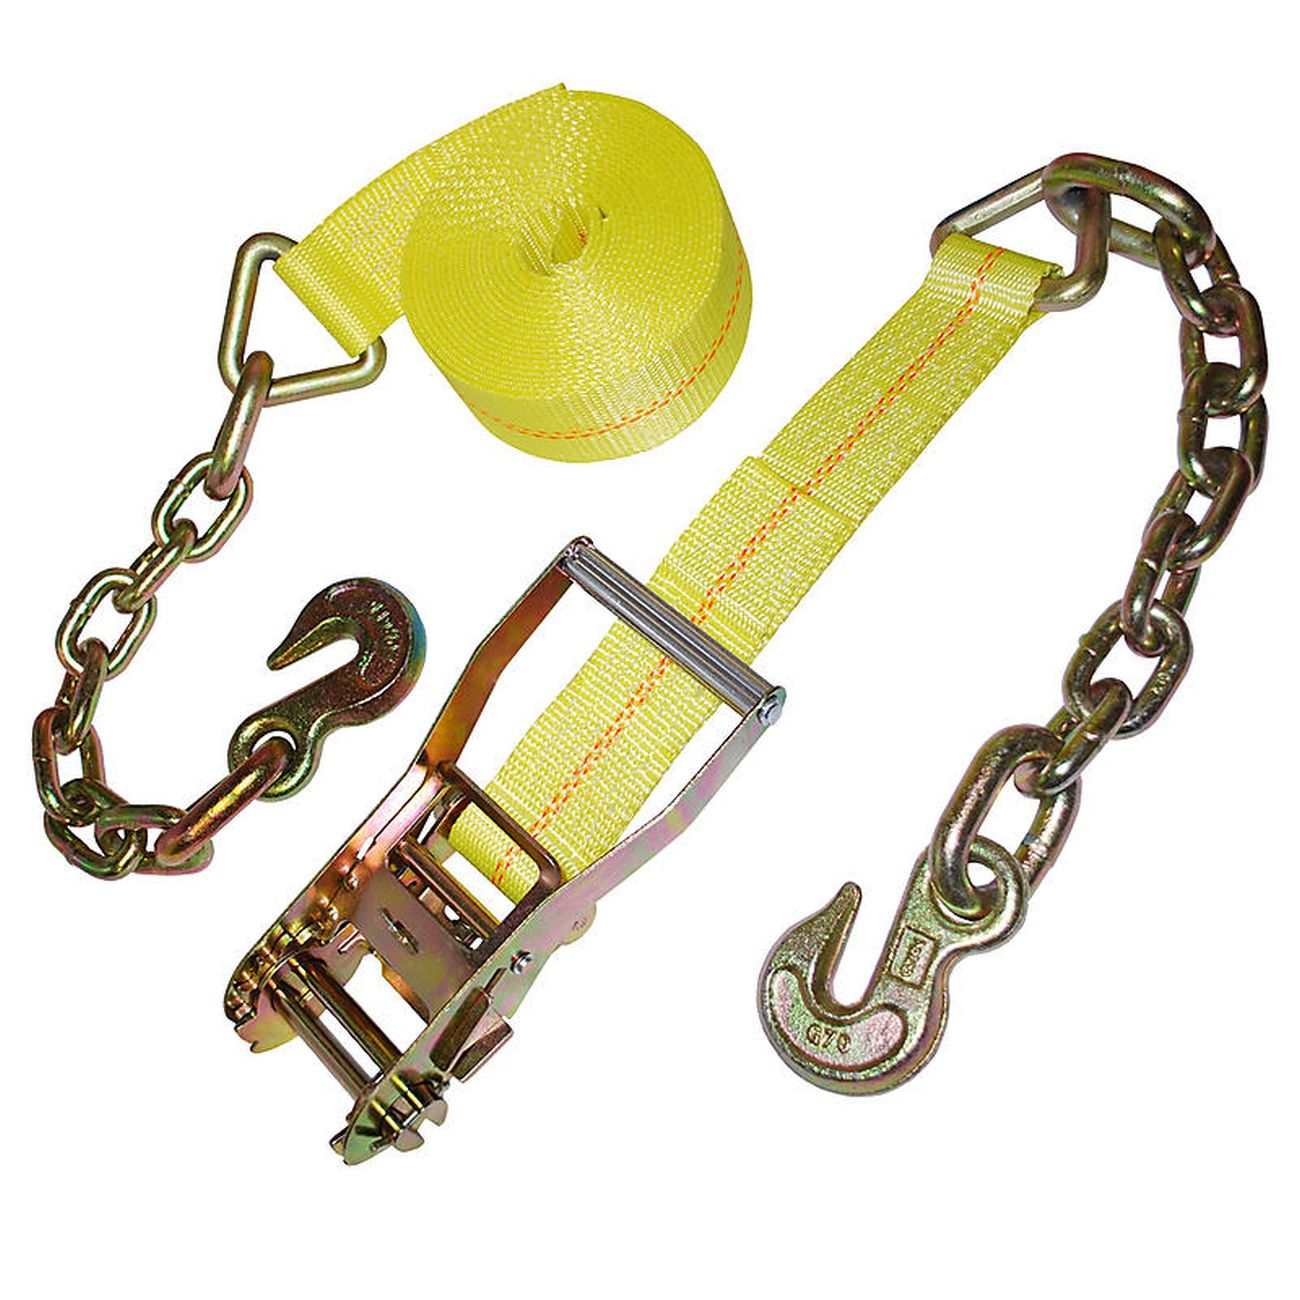 ZL183 2in. x 27ft. Heavy Duty 10,000 LBS Capacity Ratchet Tie Down with Flat Hook, Yellow